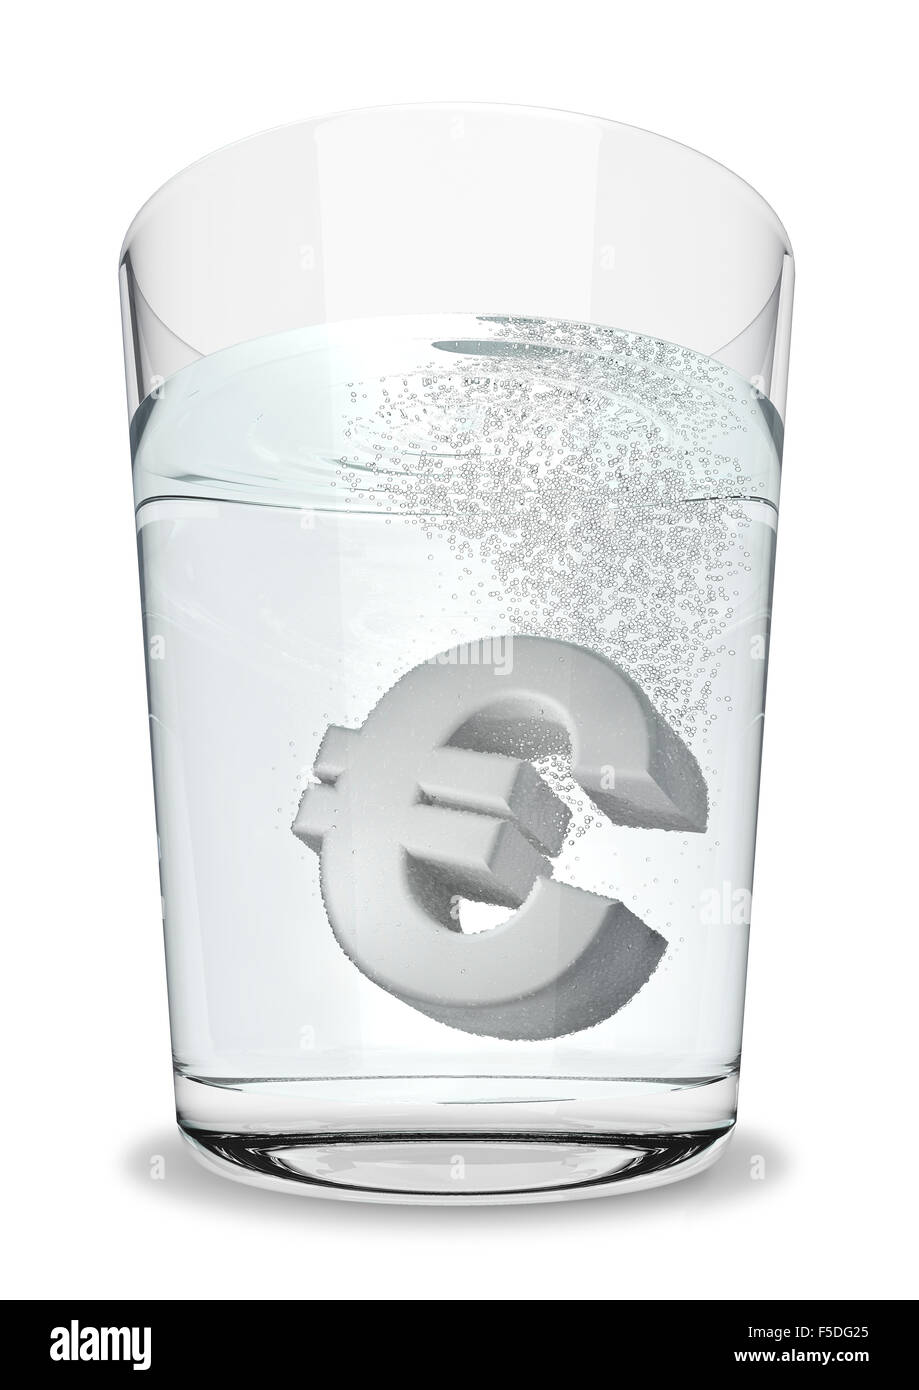 Euro seltzer / 3D render of euro symbol fizzing in glass of water Stock Photo